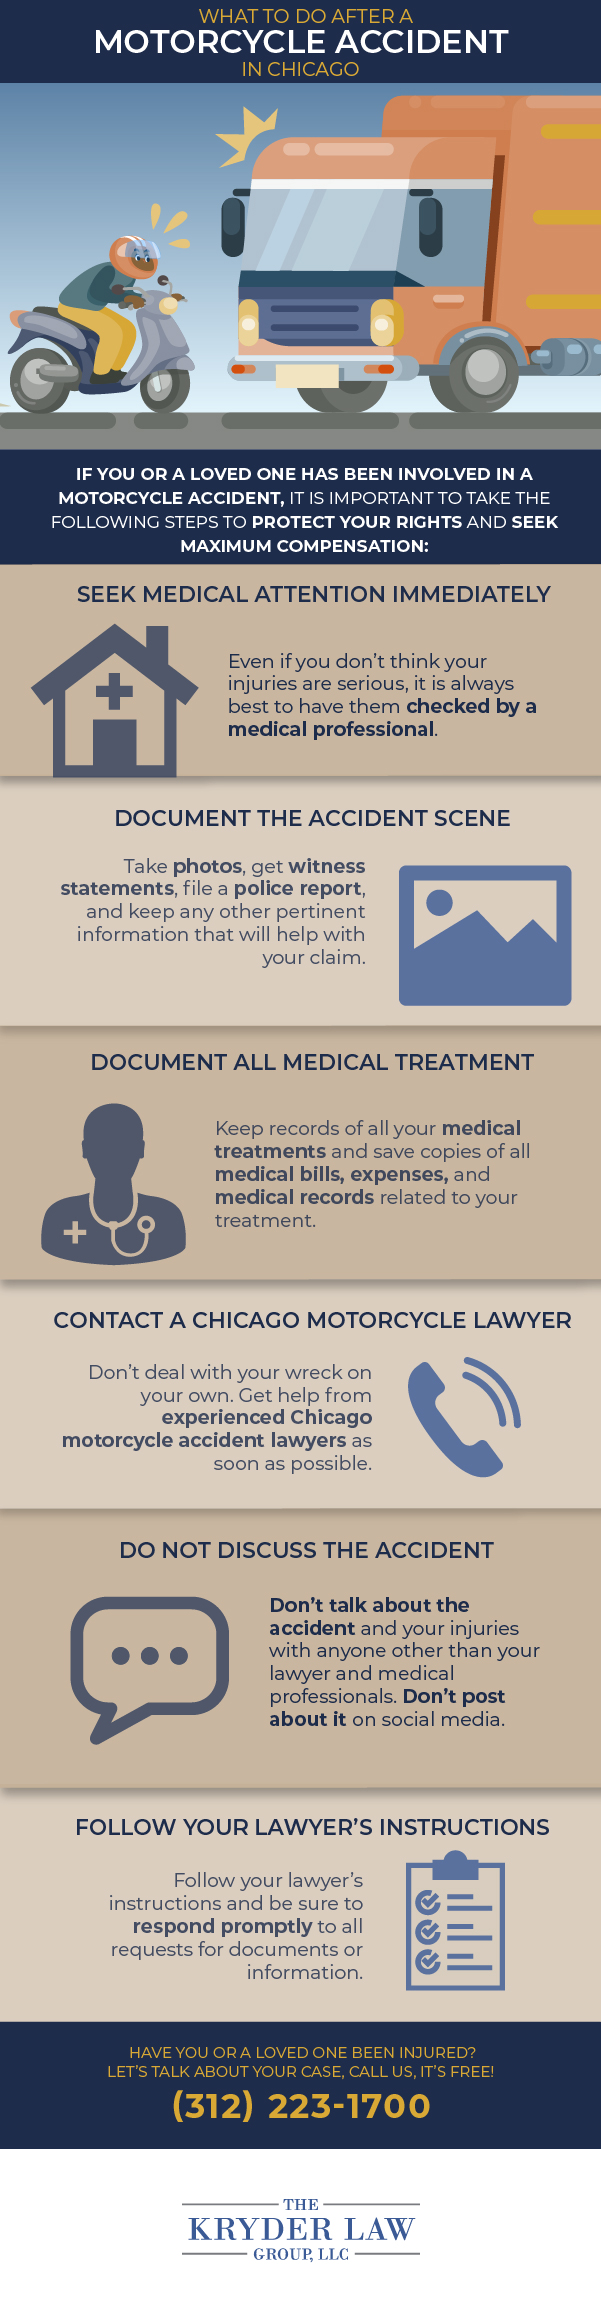 What To Do After A Motorcycle Accident in Chicago Infographic